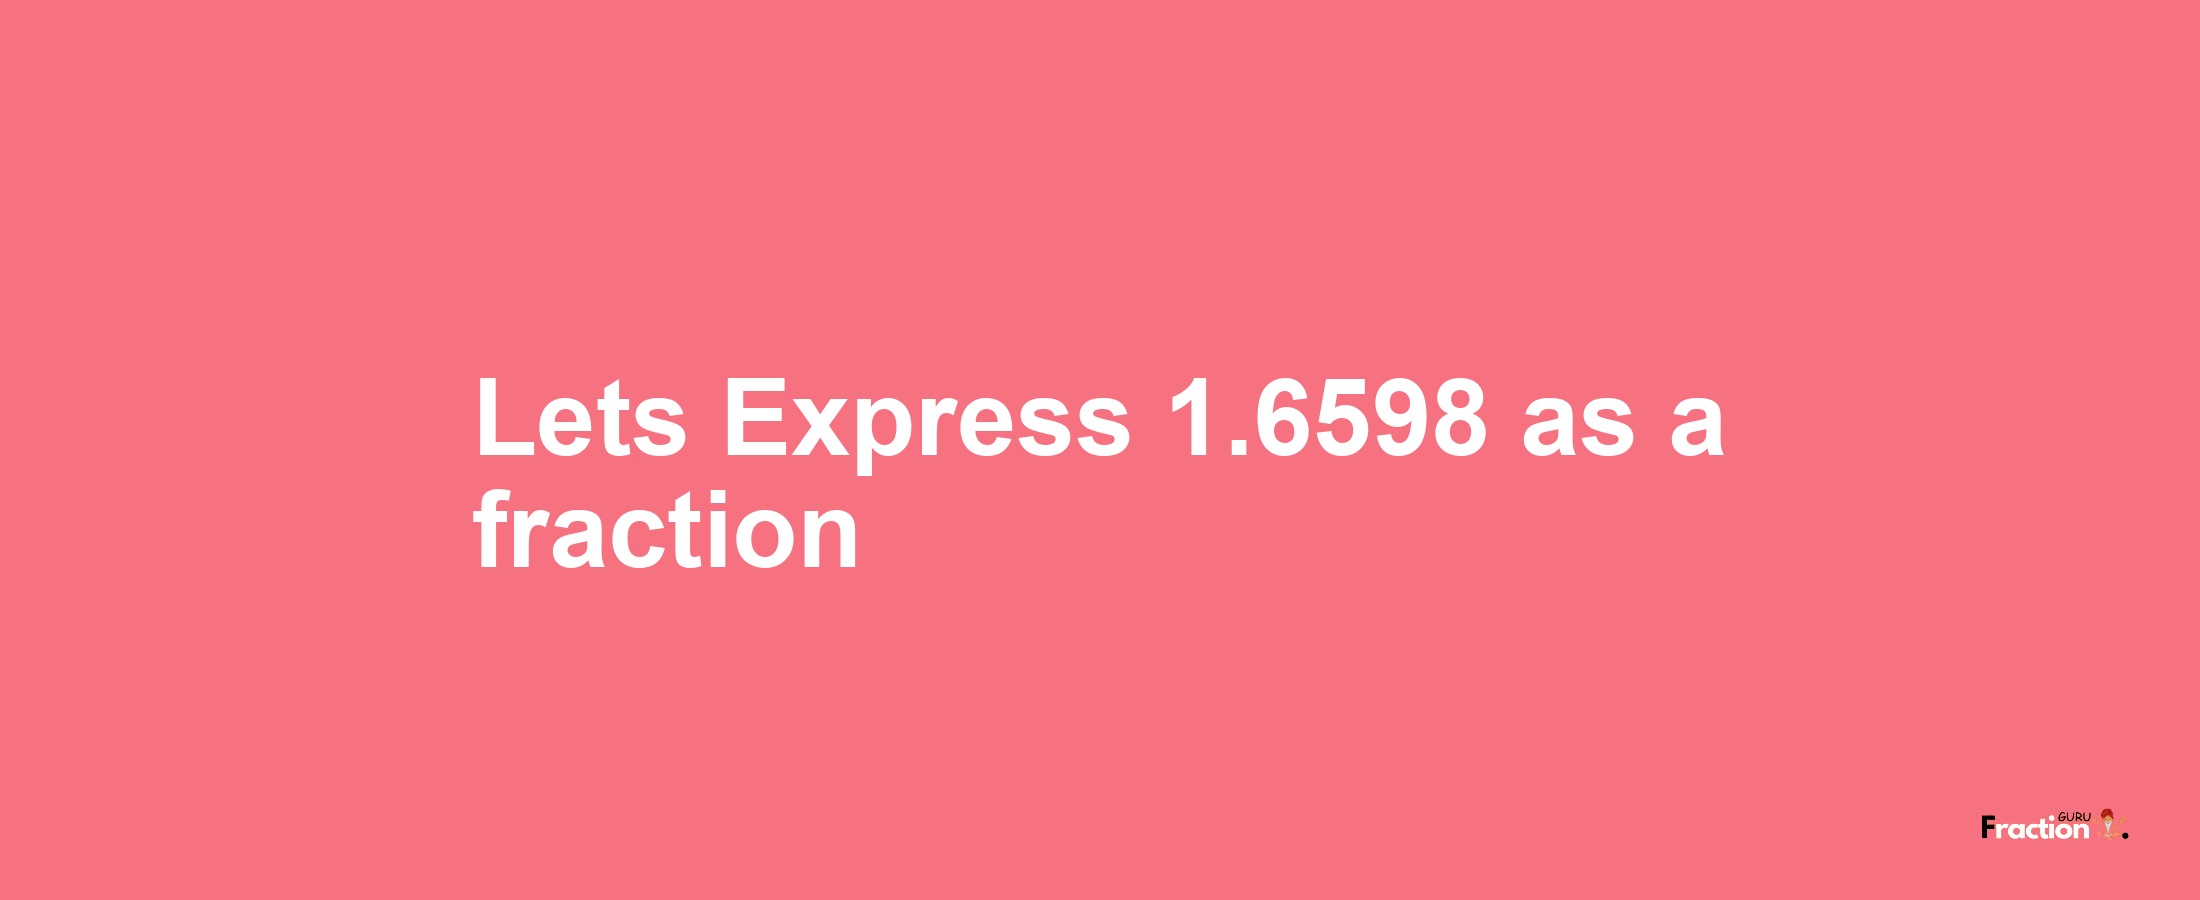 Lets Express 1.6598 as afraction